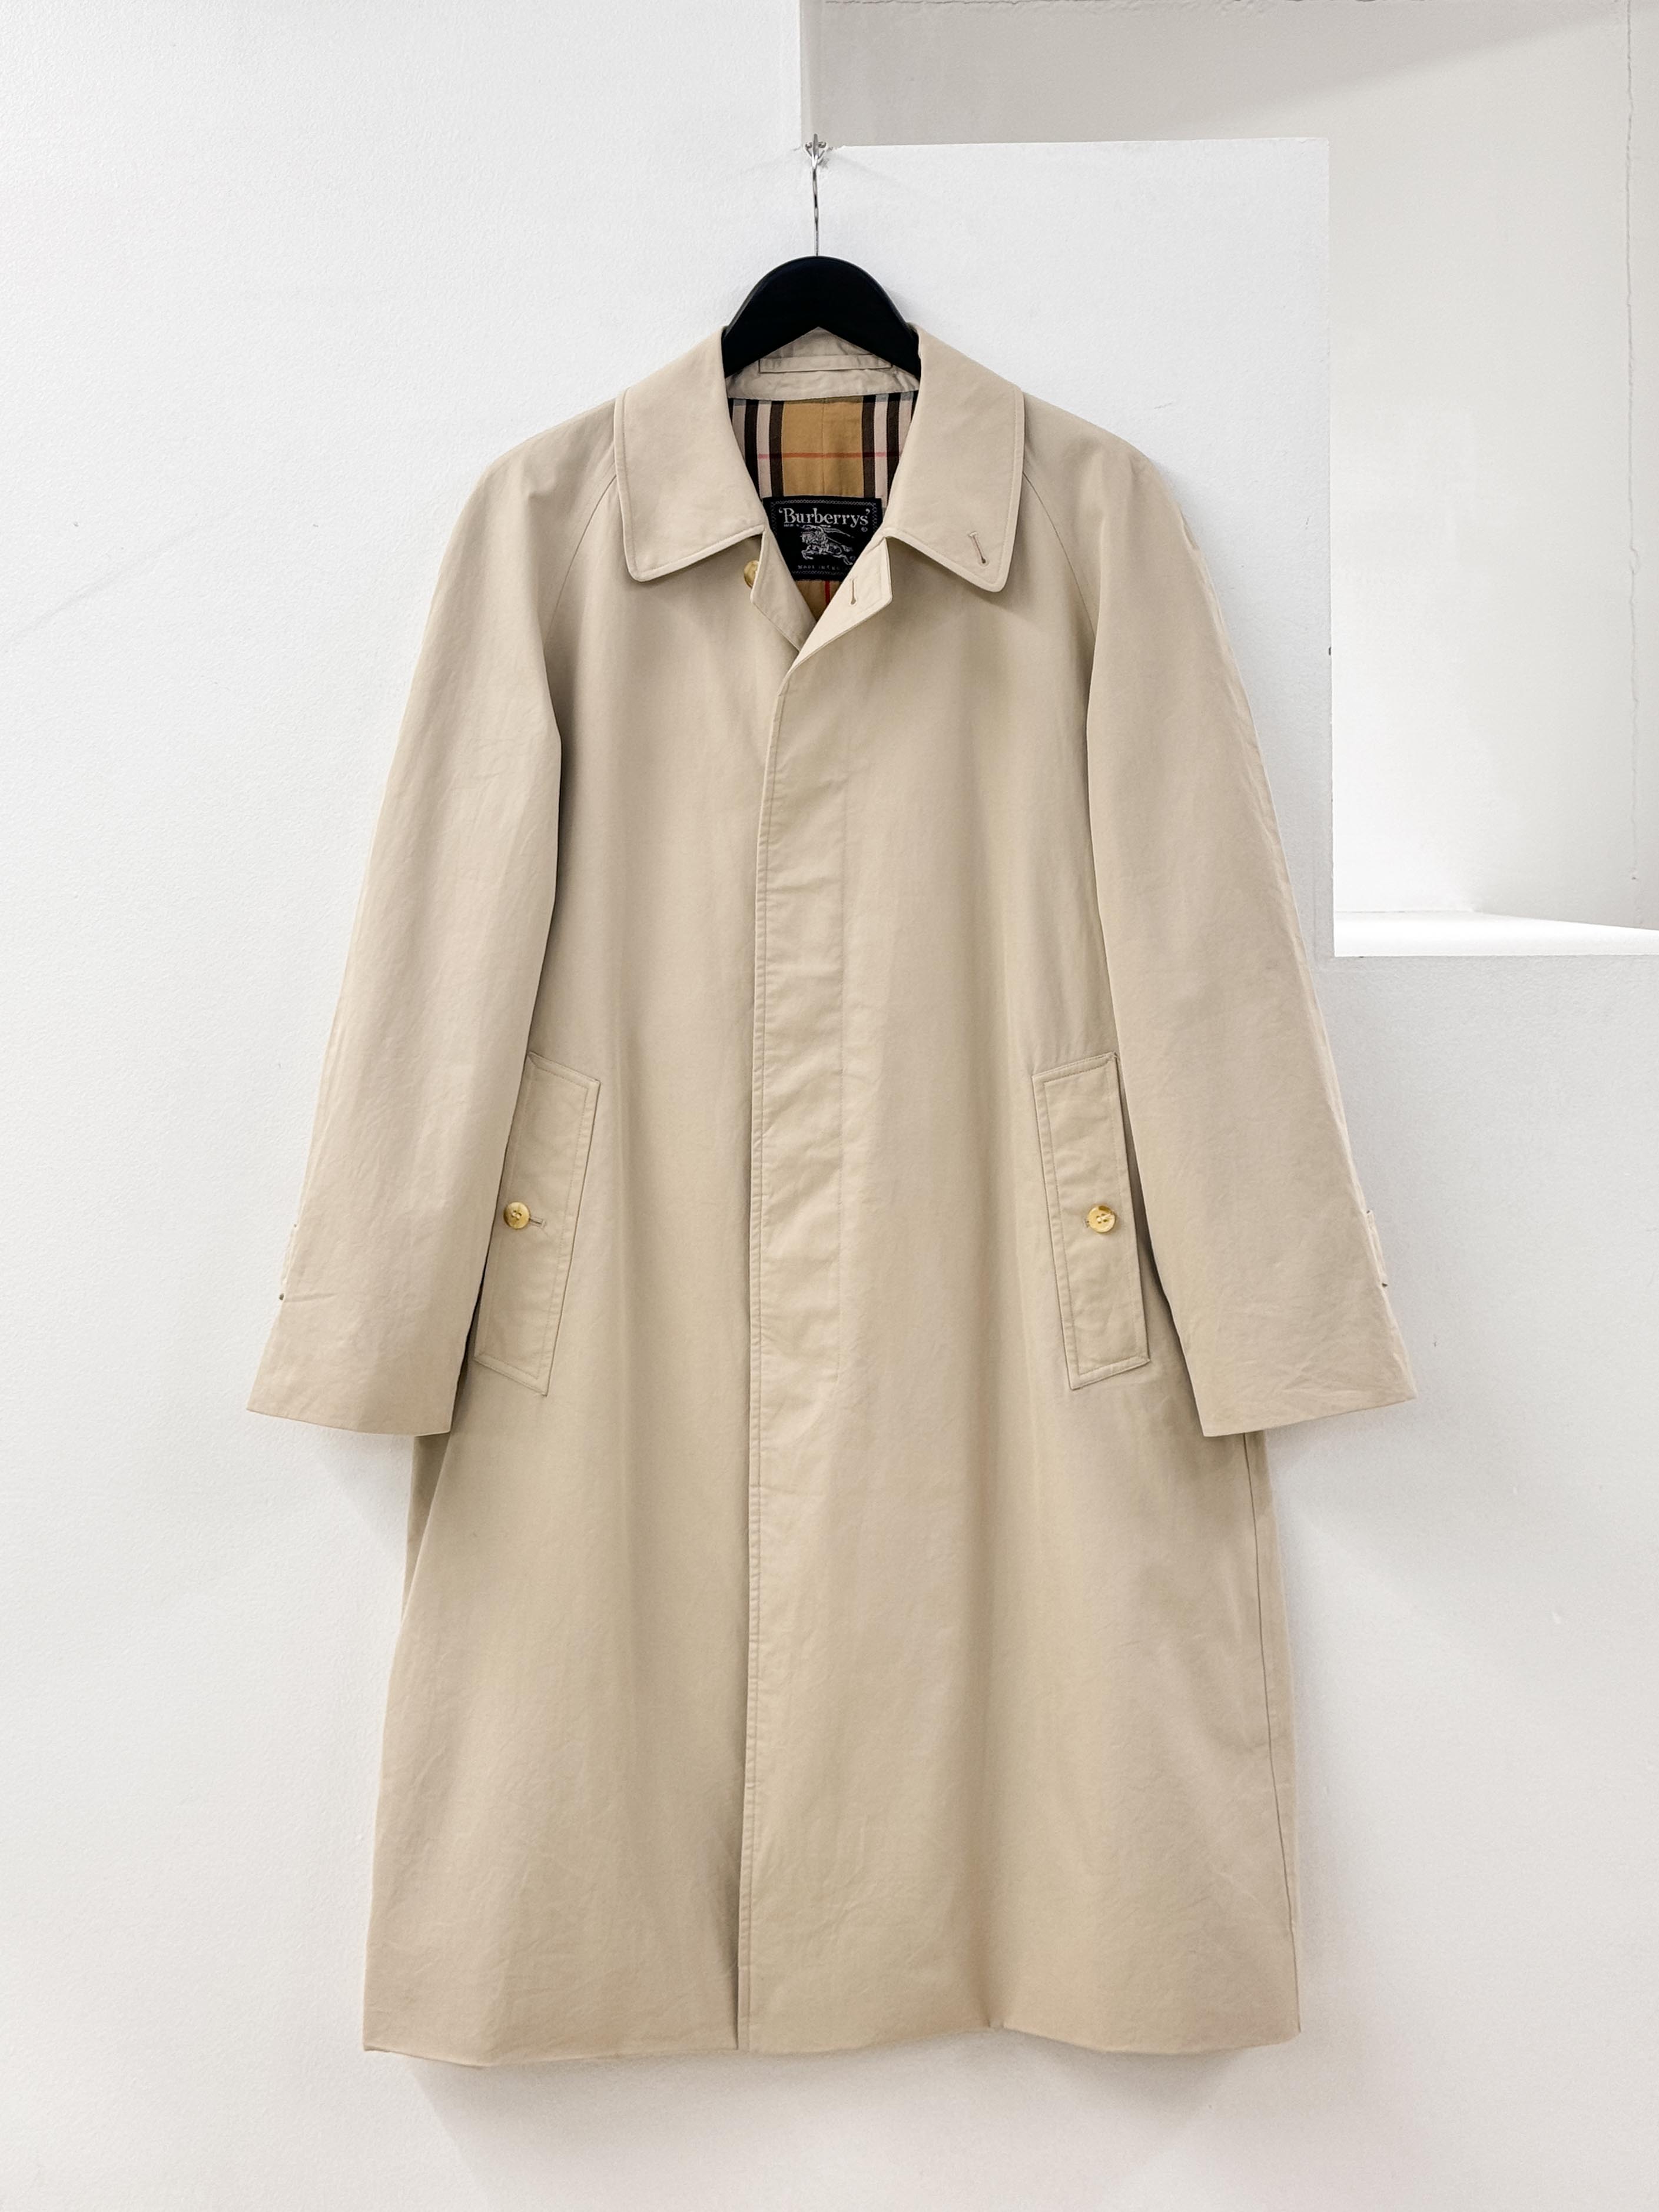 Burberry trench coat, England made